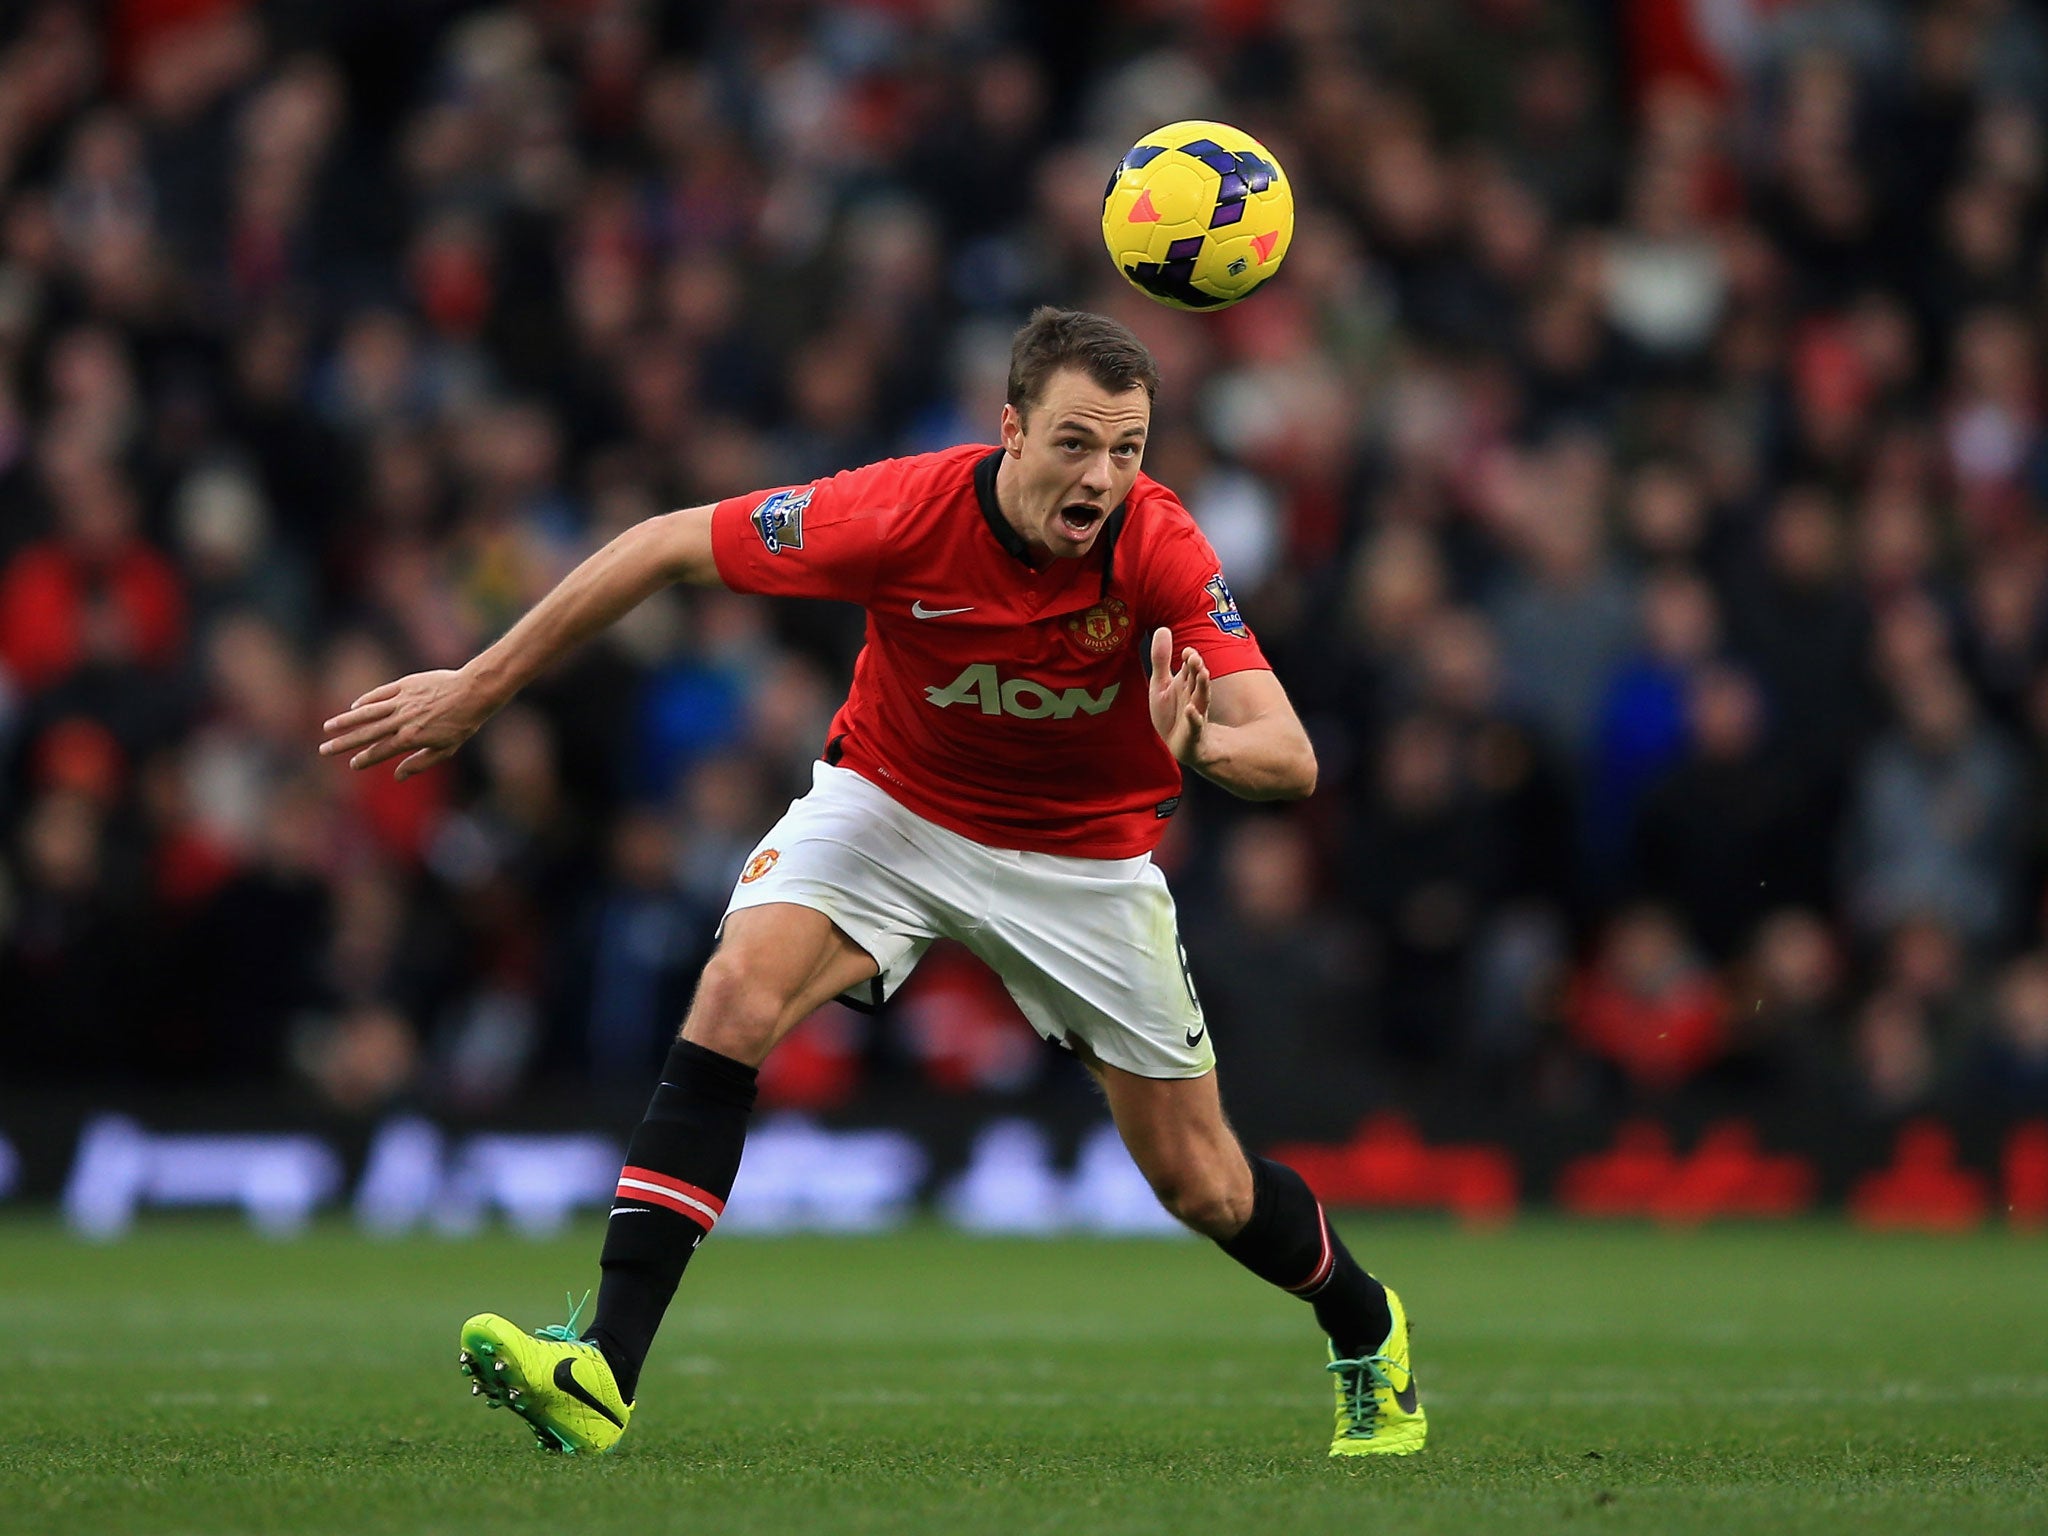 Jonny Evans admits that his place in the Manchester United first team is not a given despite starting the past four matches